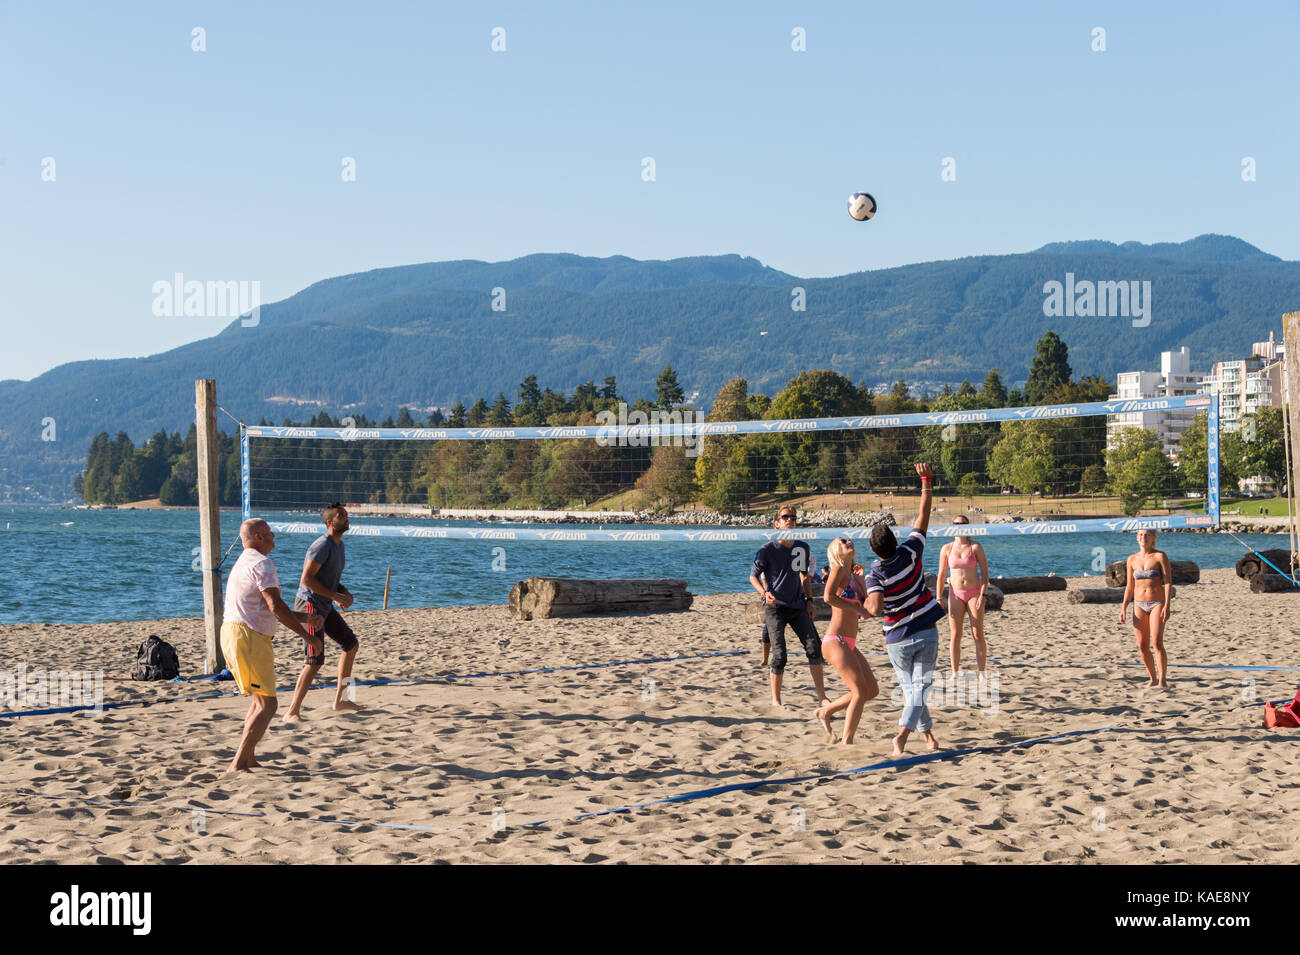 People playing beach volley at Vancouver English Bay beach in summer. Vancouver, British Columbia, Canada - 14 September 2017. Stock Photo